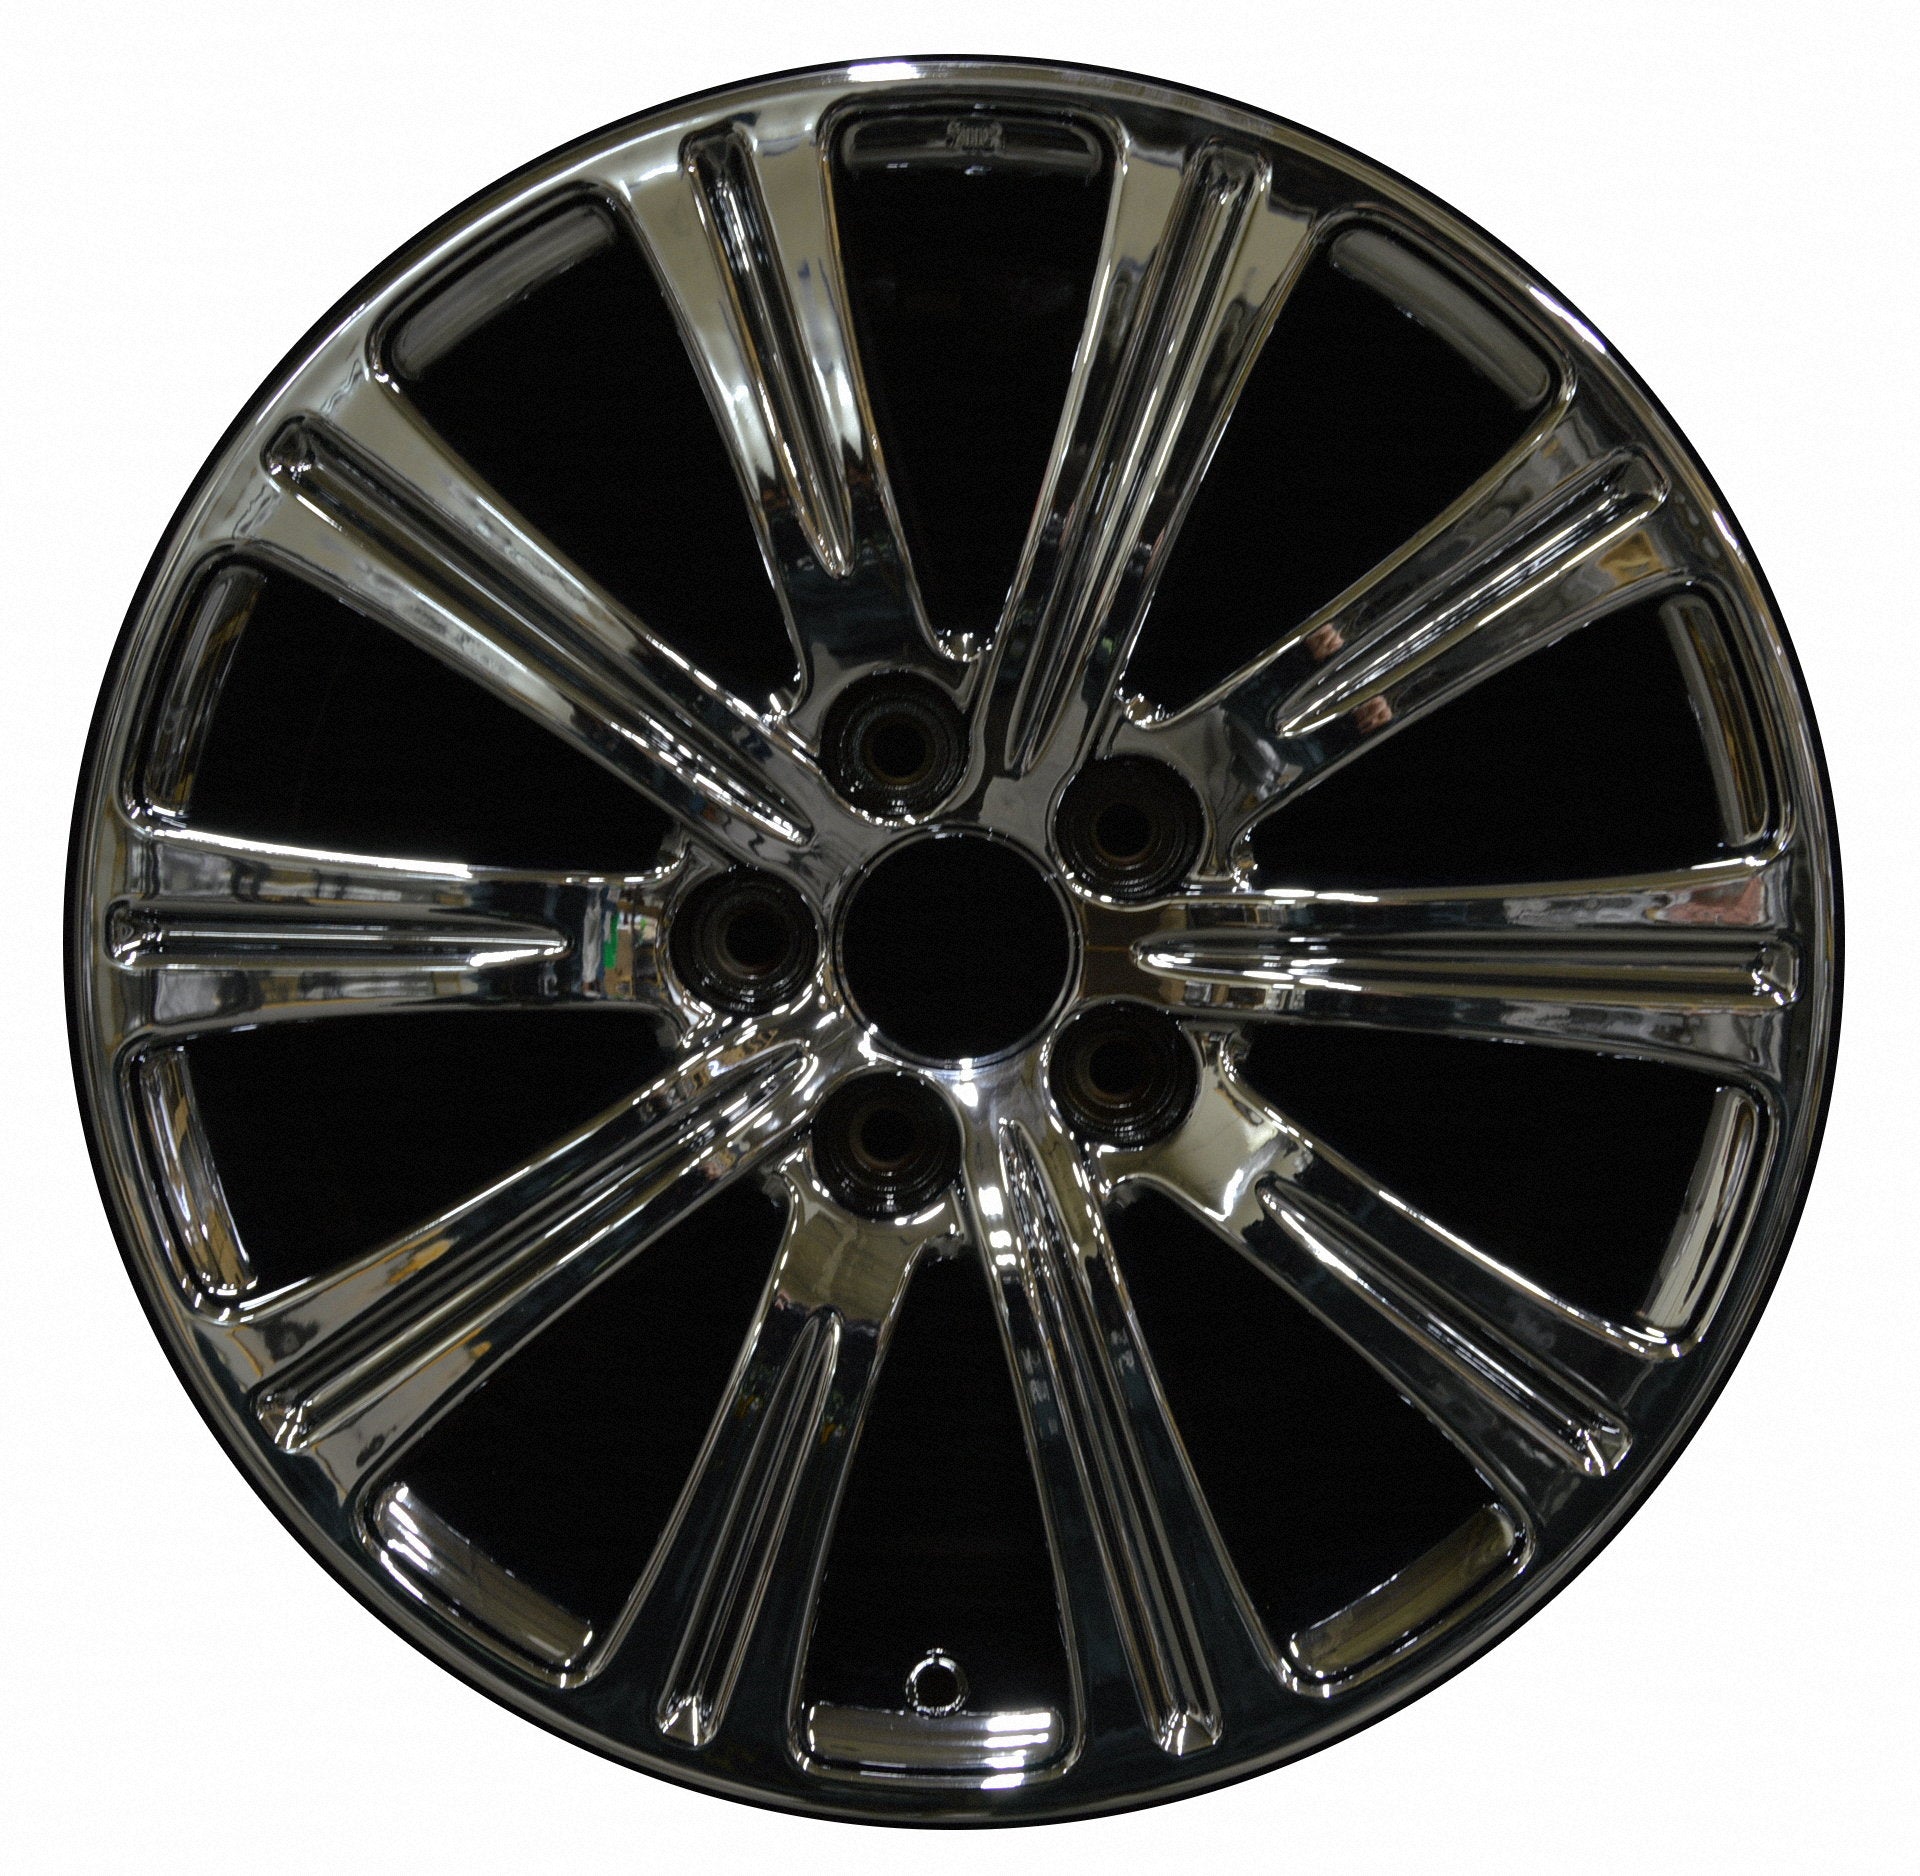 Acura TL  2009, 2010, 2011, 2012, 2013, 2014 Factory OEM Car Wheel Size 18x8 Alloy WAO.71796.PVD4.FF